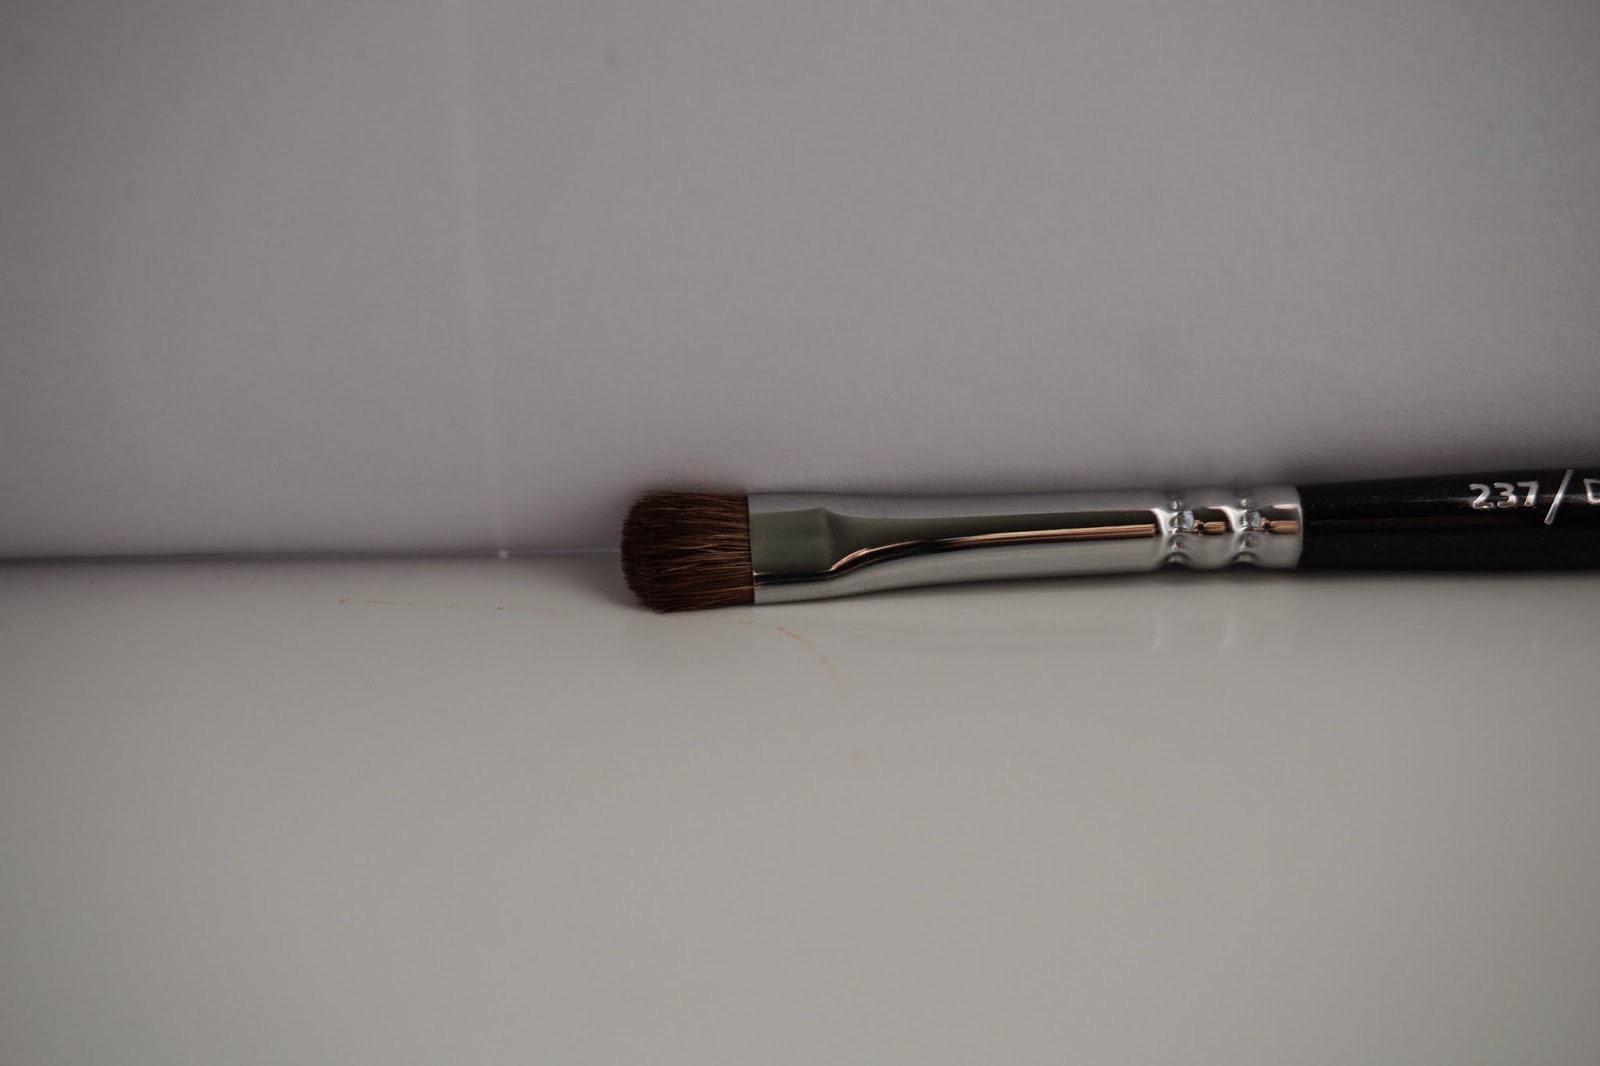 Review: Zoeva Eye Brushes - Dusty Foxes Beauty Blog